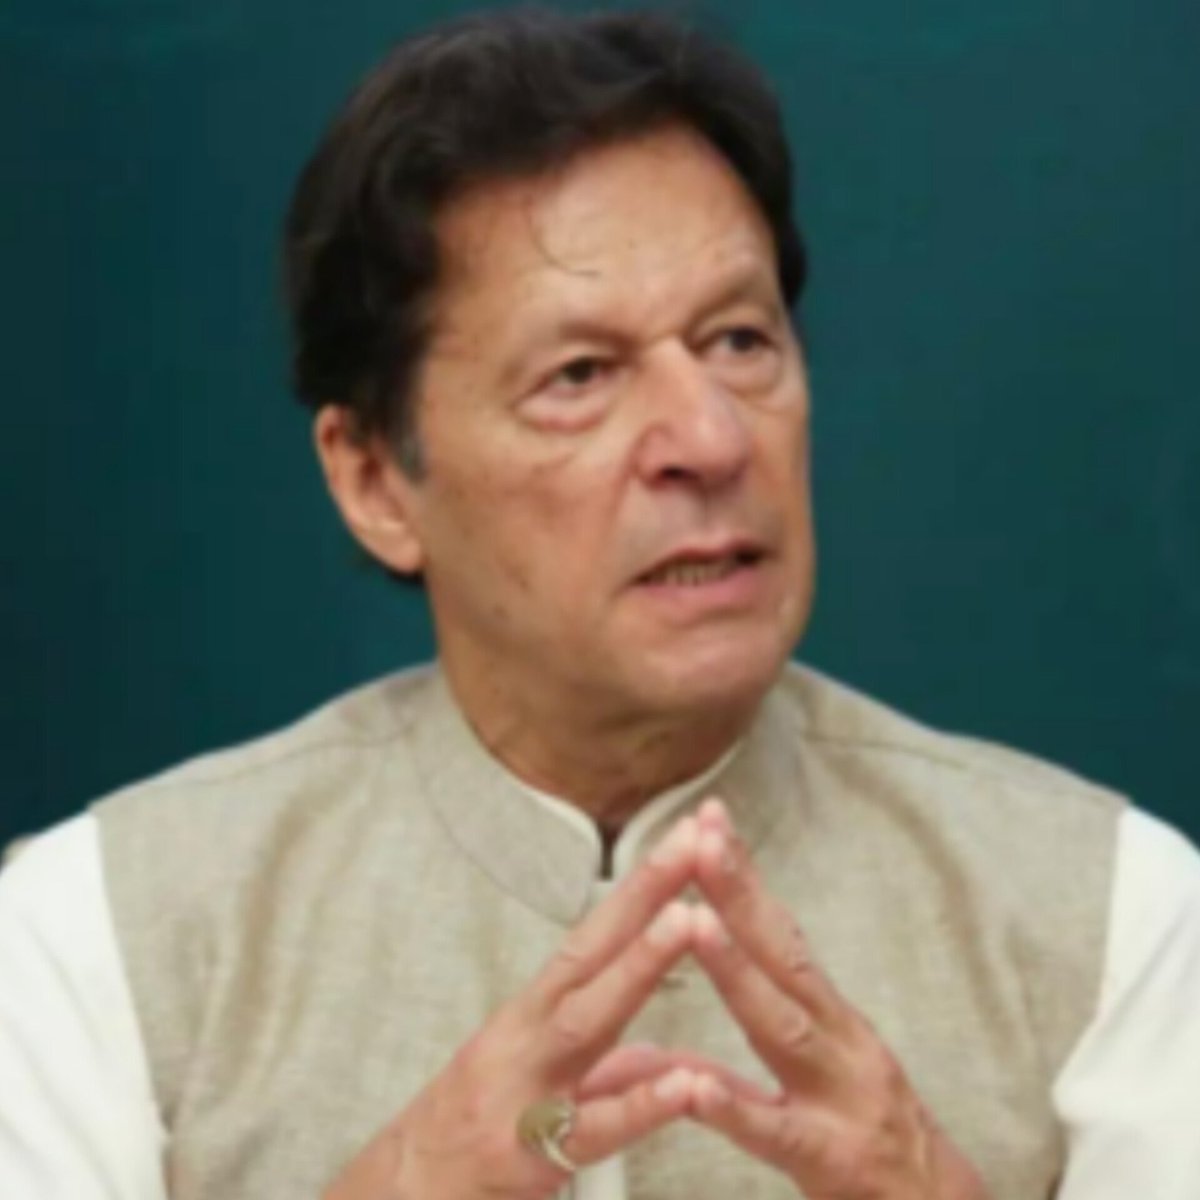 #ImranKhan barred from 2024 elections due to corruption conviction. Election body rejects nomination, citing non-registration as a voter. Khan alleges military targeting.

Read more on- shorts91.com/category/inter…

#Pakistan #PakistanElection #Elections2024 #PakistanPM